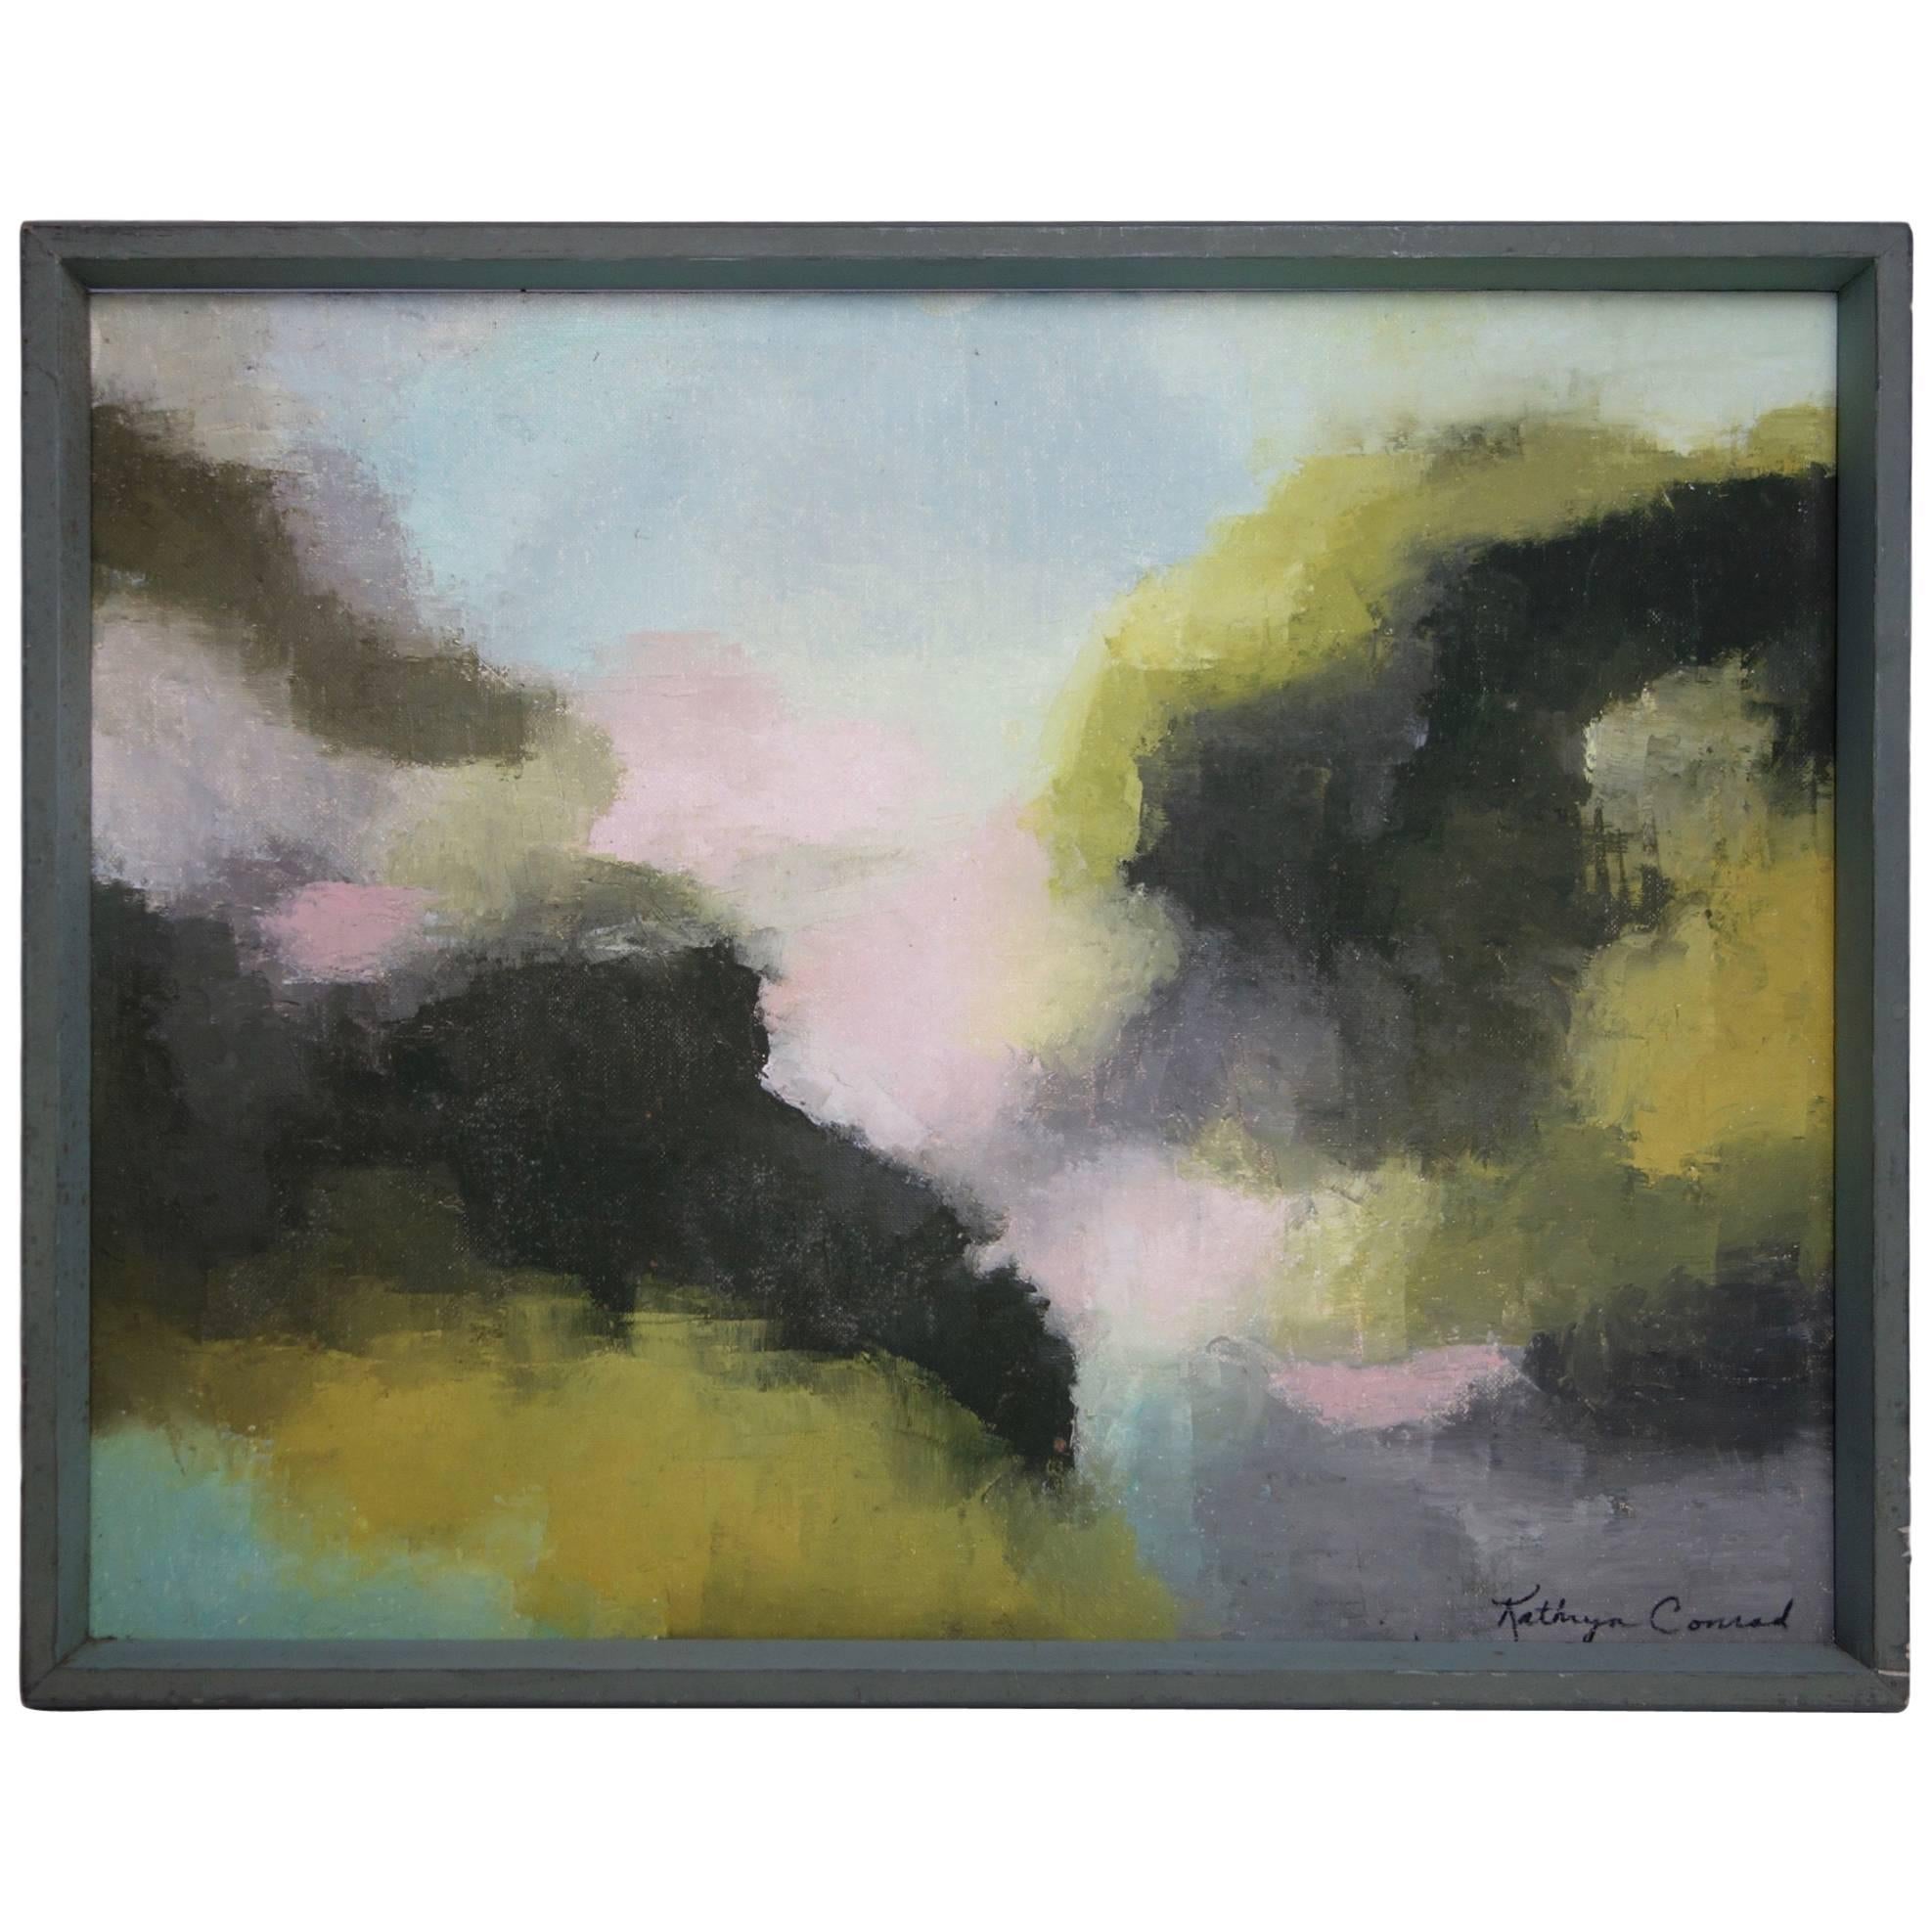 Framed Pastel Abstract Signed “Kathryn Conrad 1968”